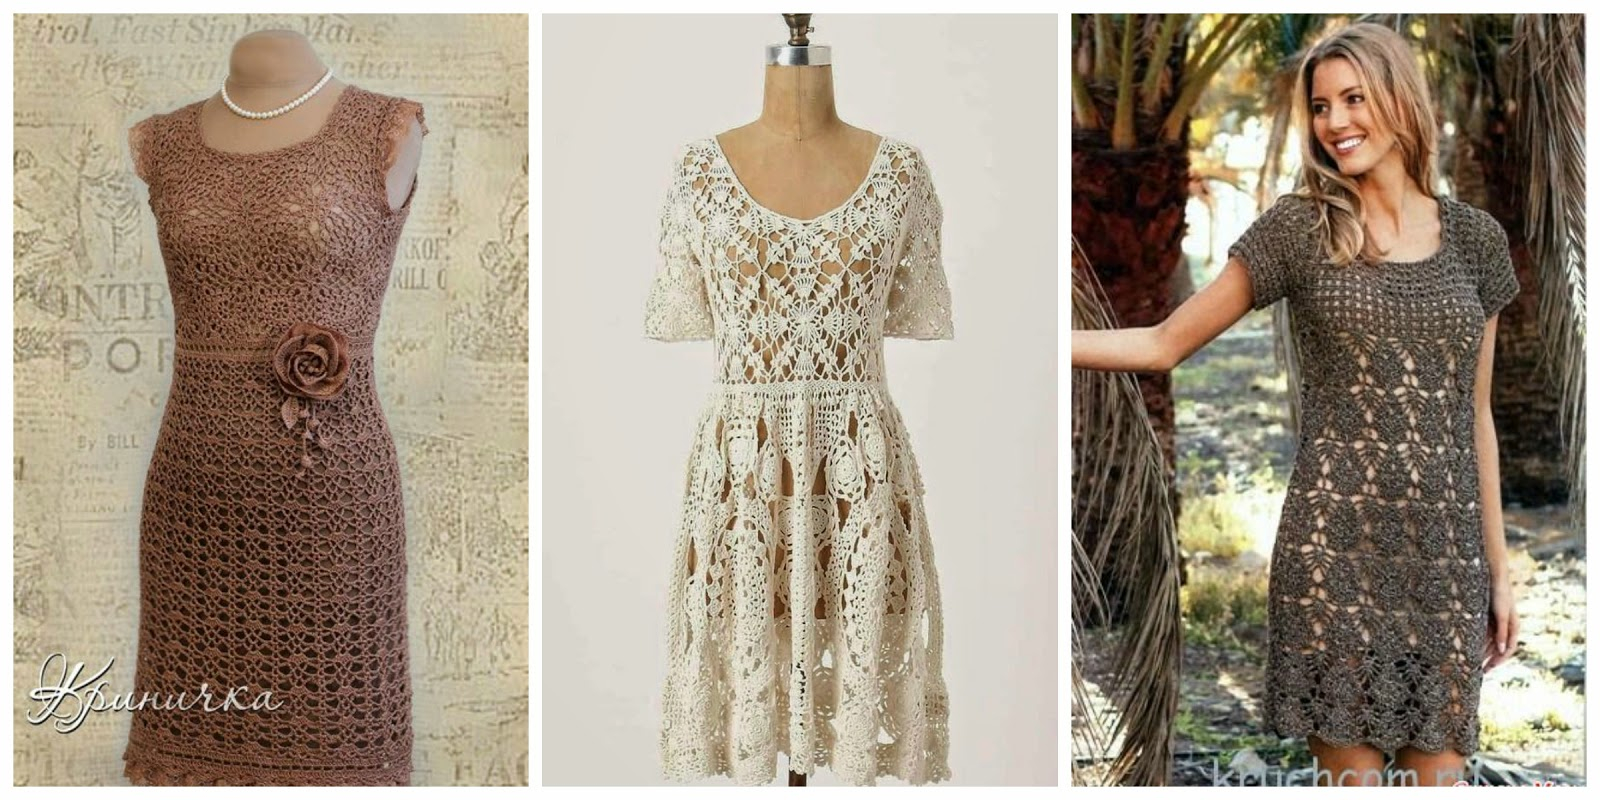 Plus Size Crochet Patterns Add Spice To Your Wardrobe With Crochet Dress Patterns Crochet And